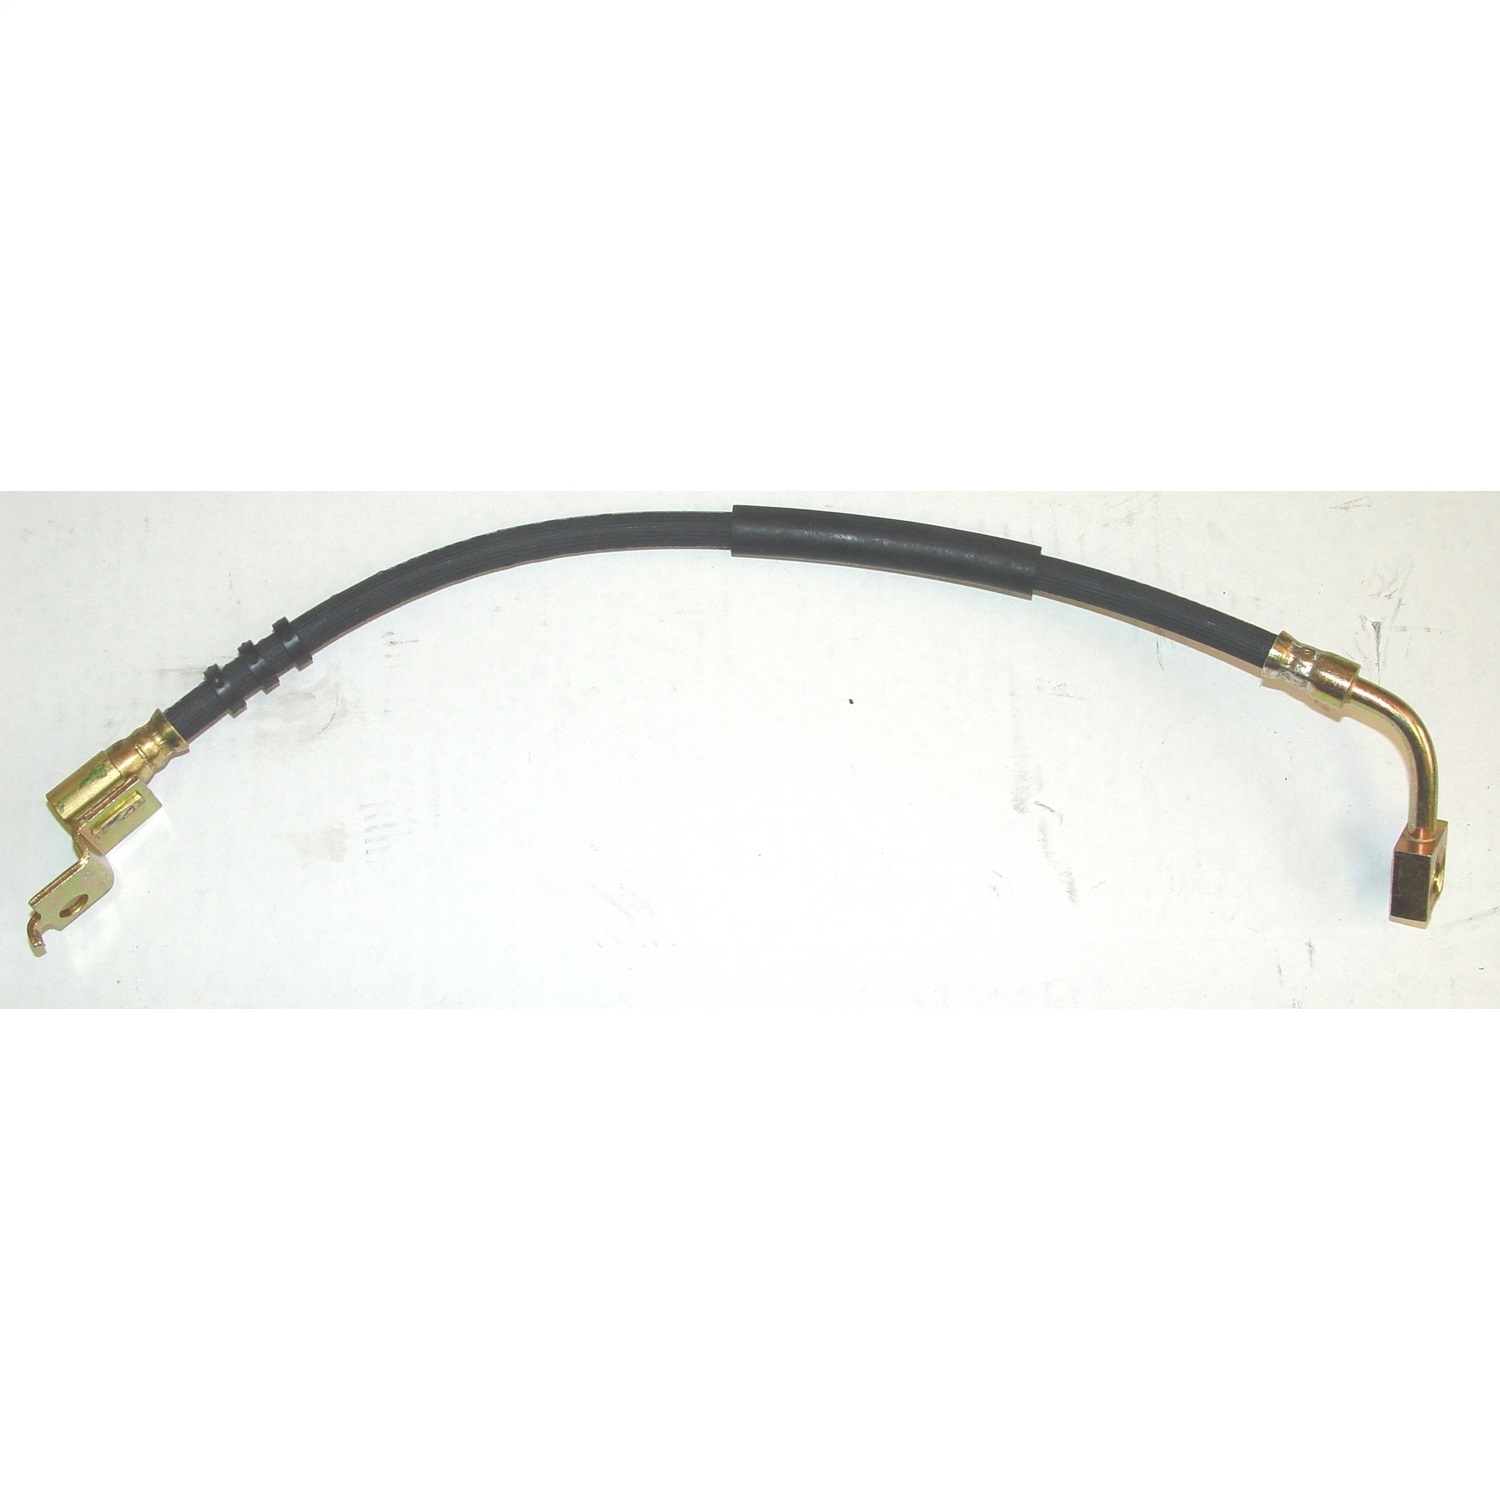 Omix Front Brake Hose, Left, 1984-1989 Jeep Cherokee Xj By Omix, BKGF-16732.17